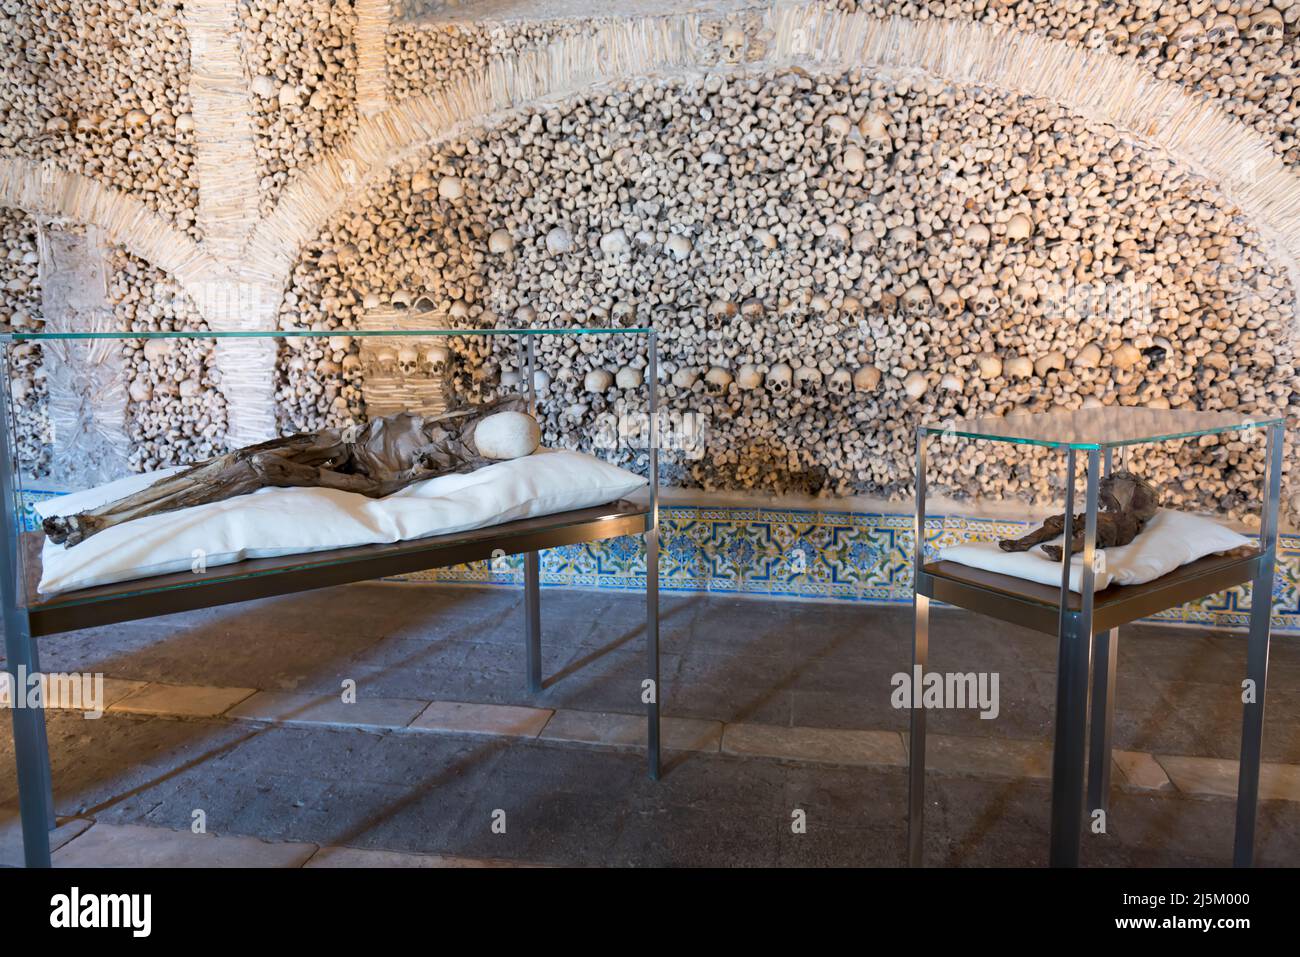 Two desiccated corpses, one of which is a child, in glass display cases inside the Capela dos Ossos ( Chapel of bones) in Evora, Porugal. Stock Photo